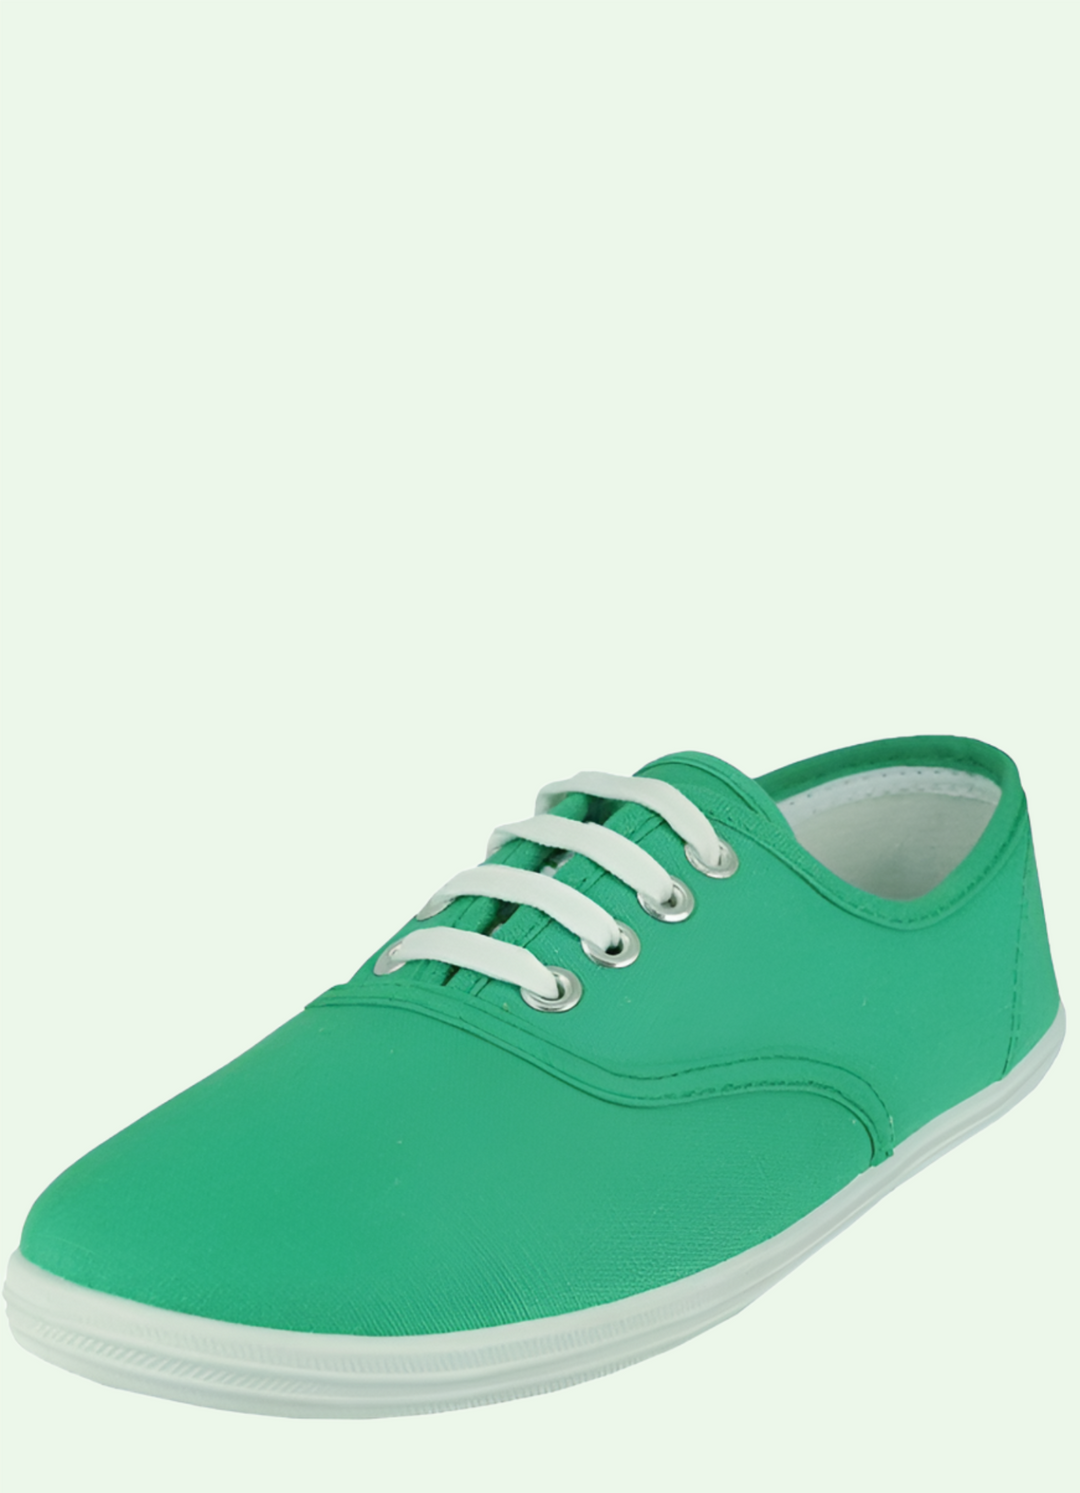 a green keds-like sneaker with white laces